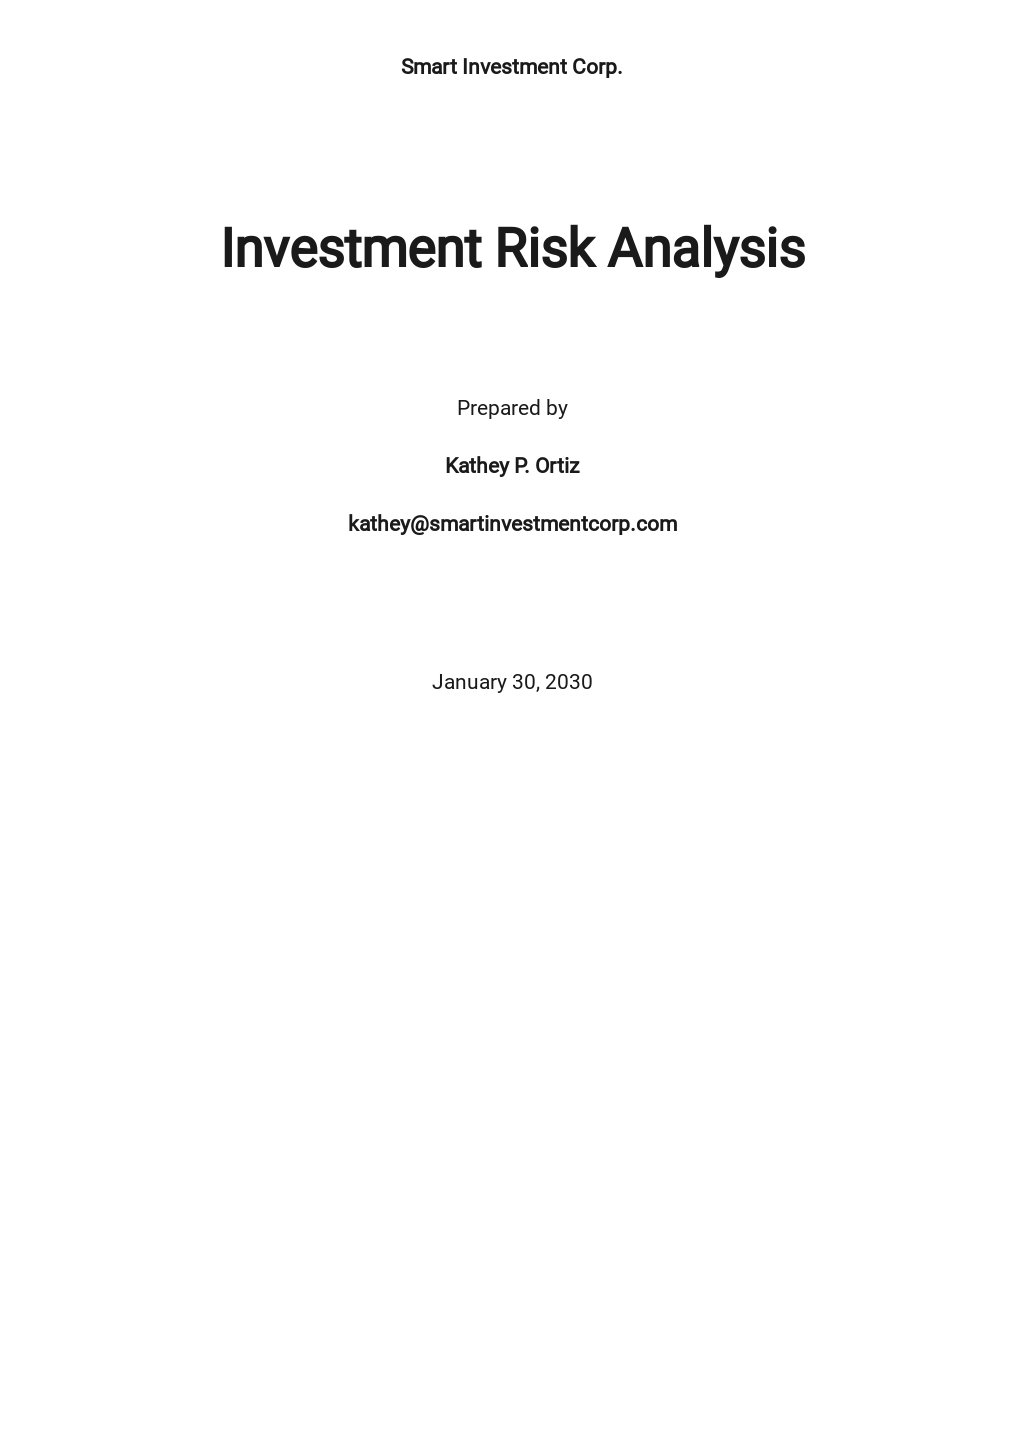 Investment Risk Analysis Template.jpe